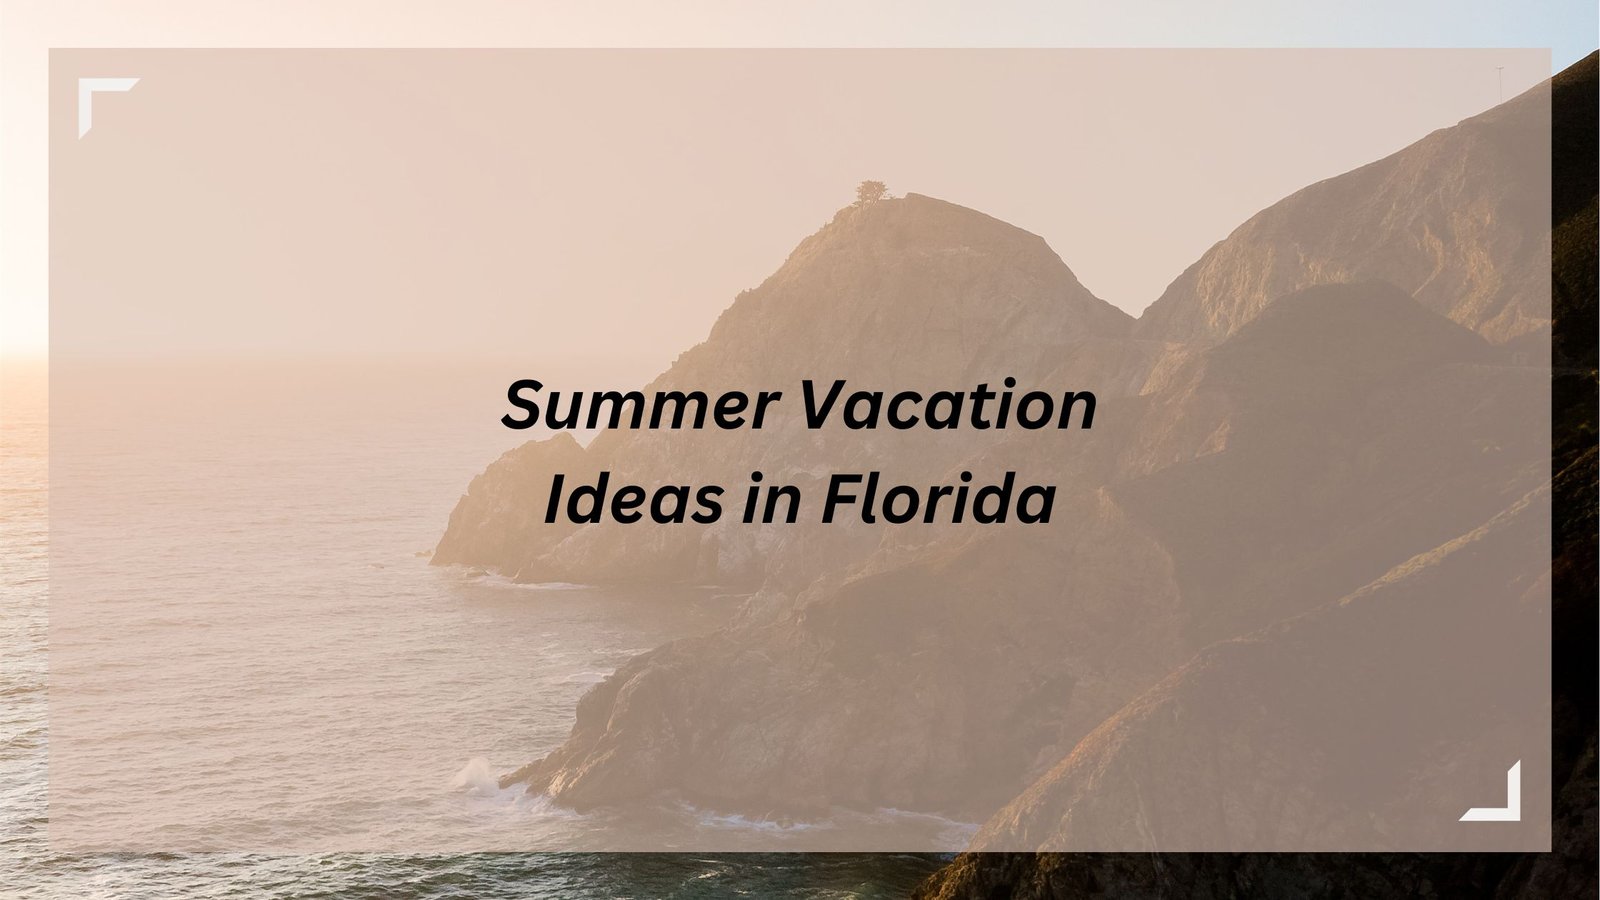 Guide to Summer Vacation Ideas in Florida